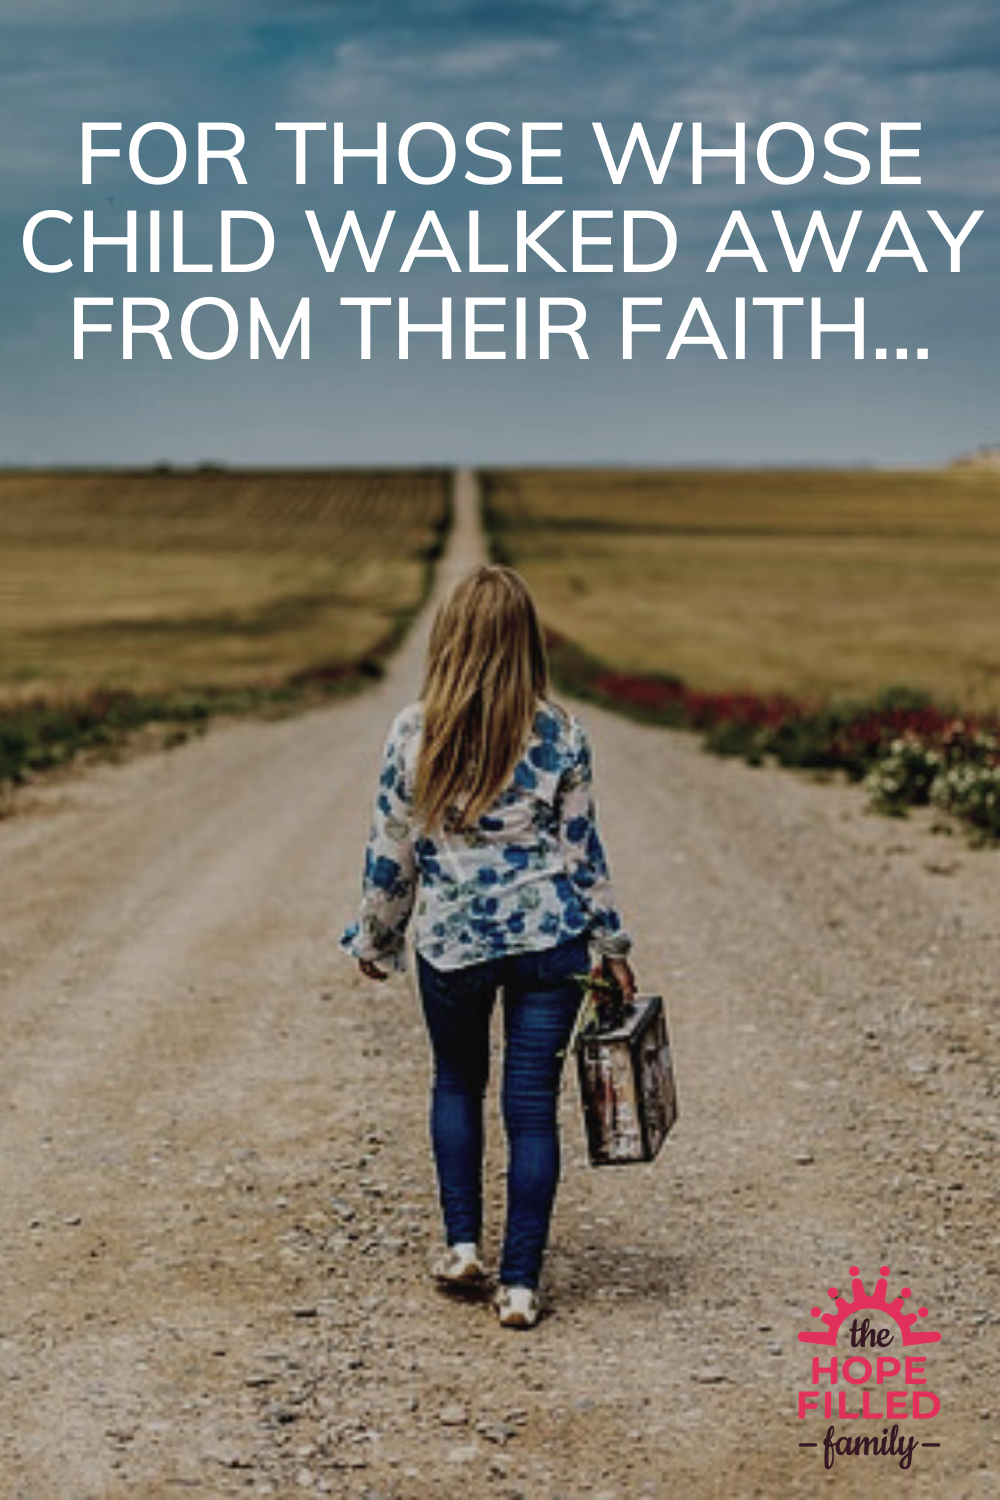 Has your grown up child rejected the faith with which you brought them up? Here are some encouragements for you.